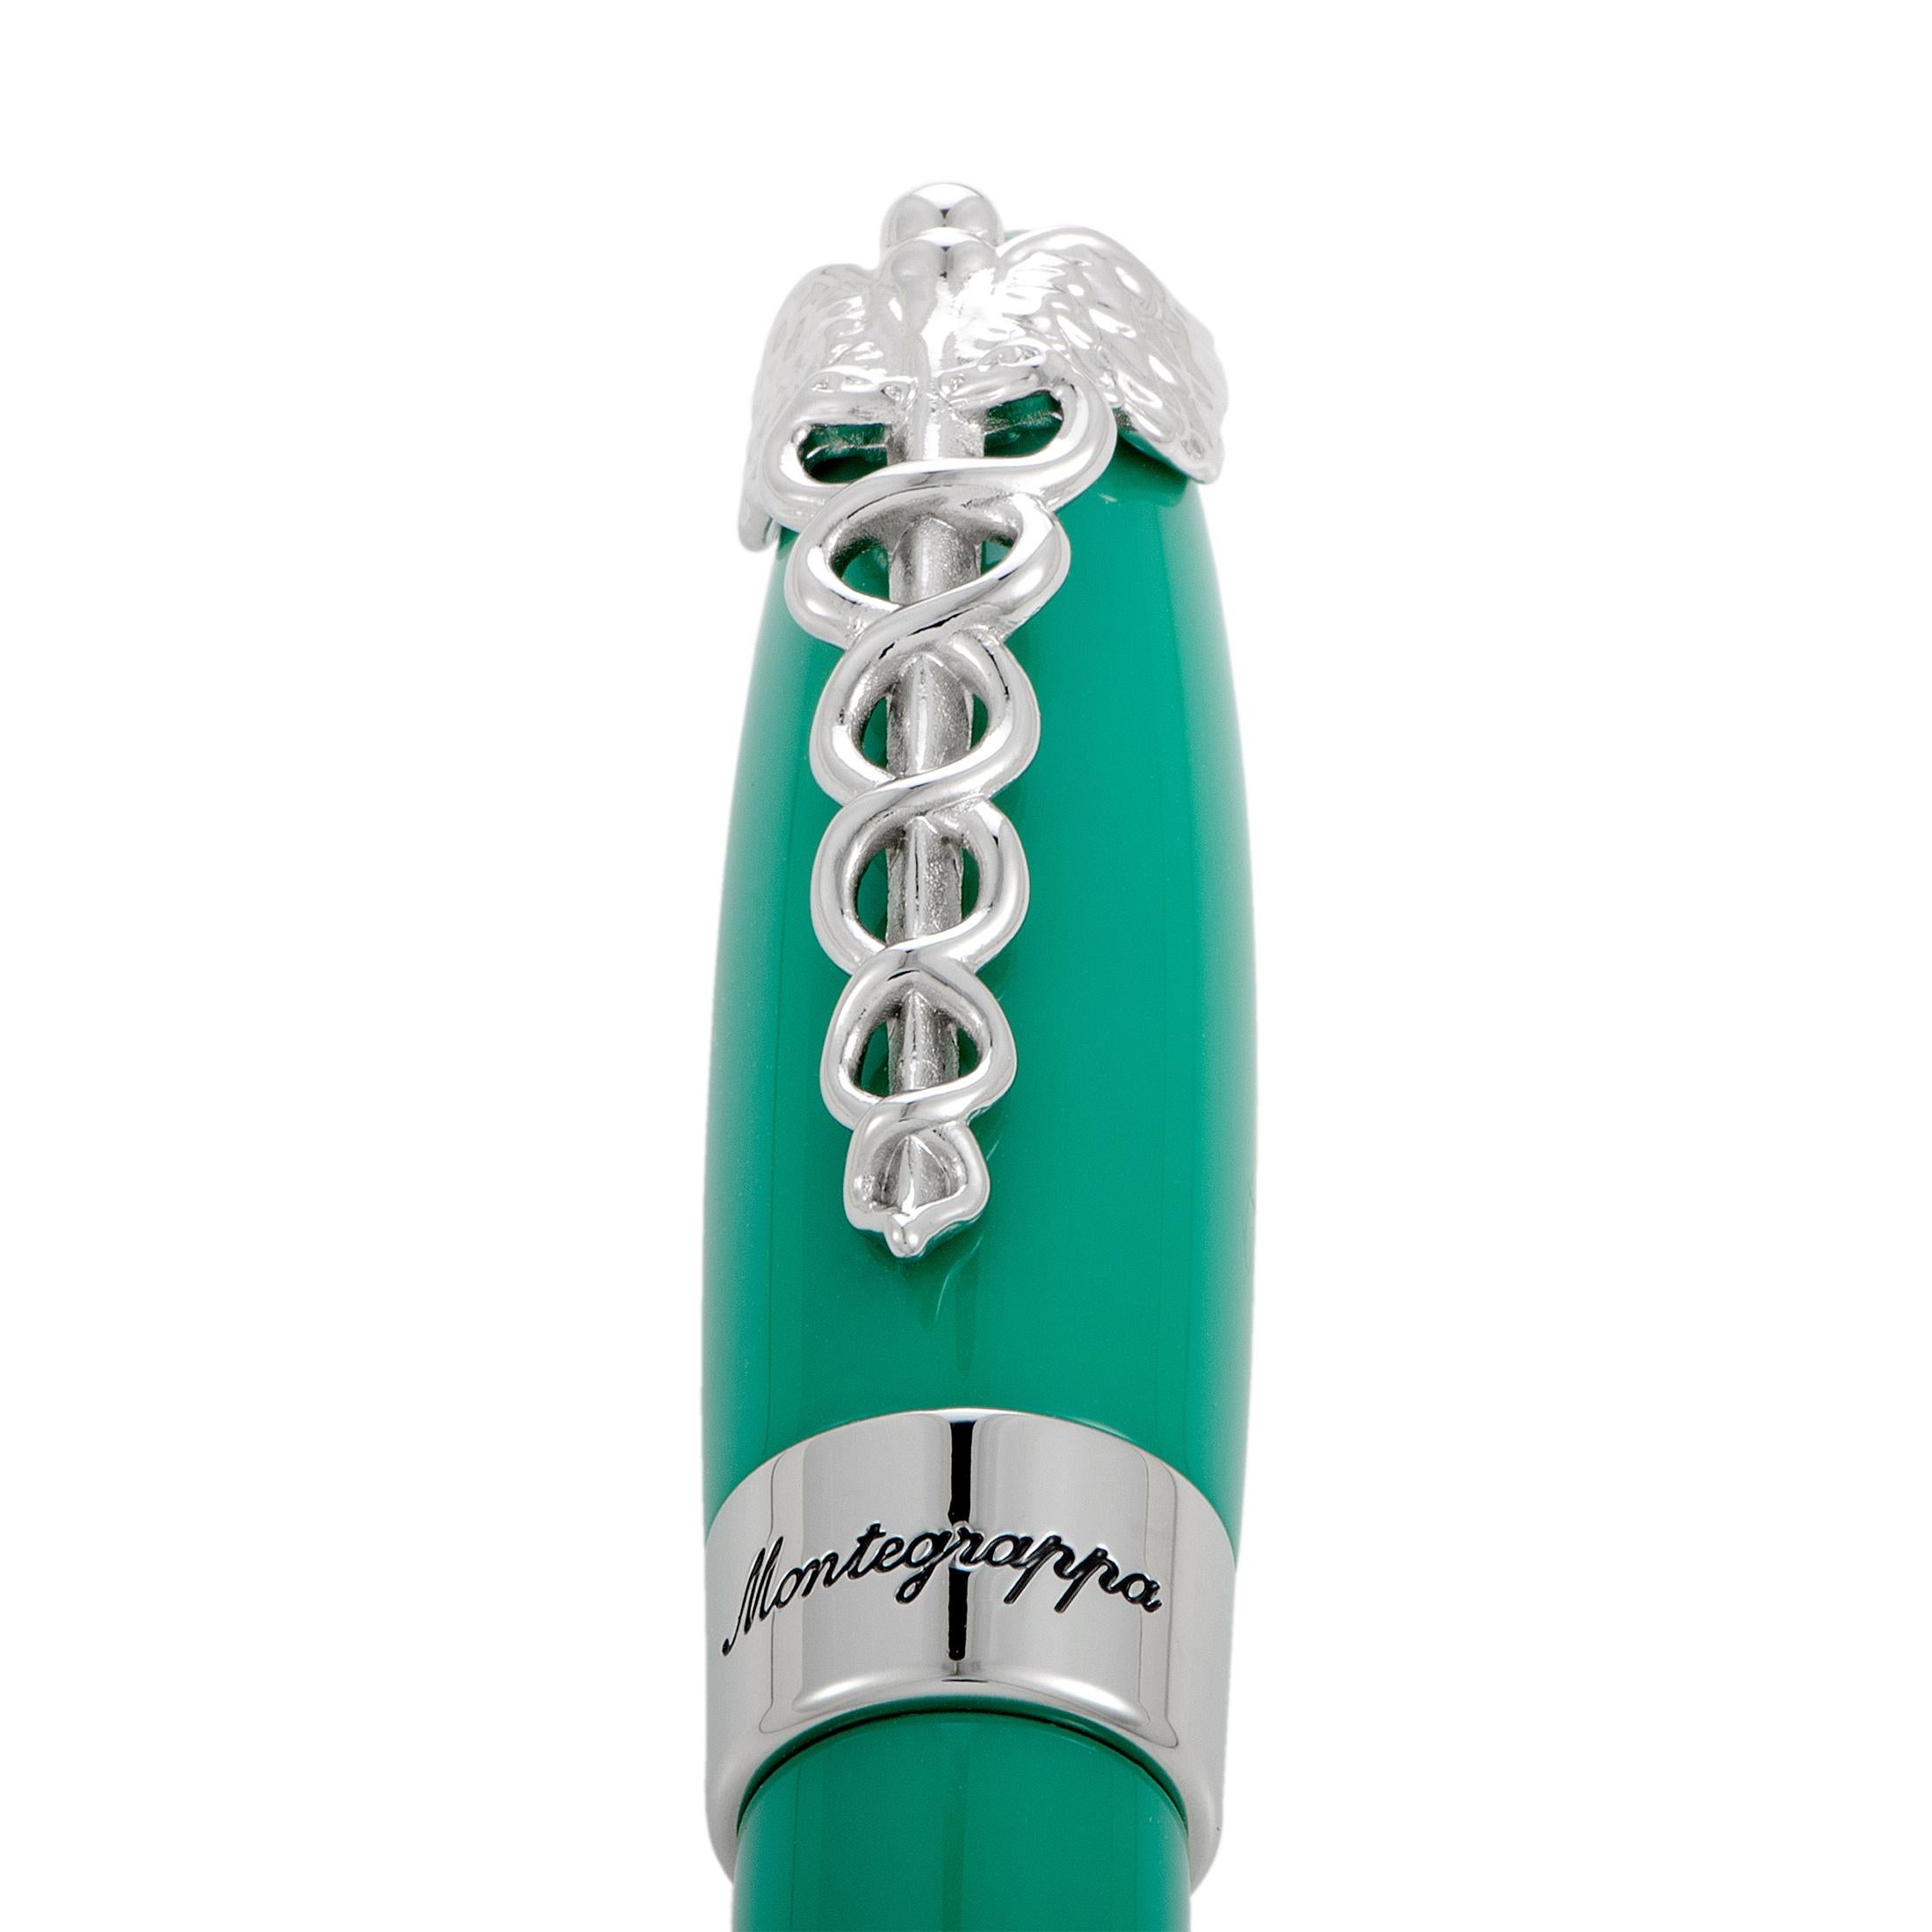 The Montegrappa “Caduceus” ballpoint pen is made of resin with palladium-plated trim. The pen is presented in medical green that is accentuated by the caduceus symbol.